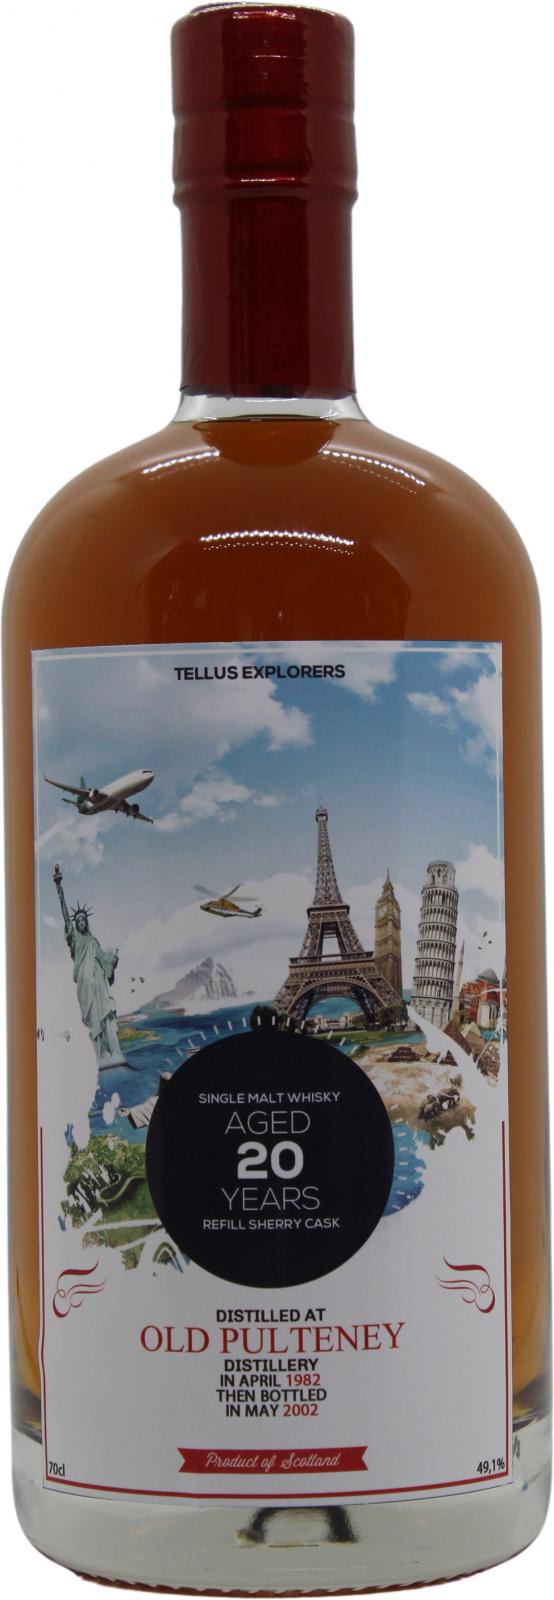 Old Pulteney 1982 UD Tellus Explorers Refill Sherry Cask Private Bottling 49.1% 700ml